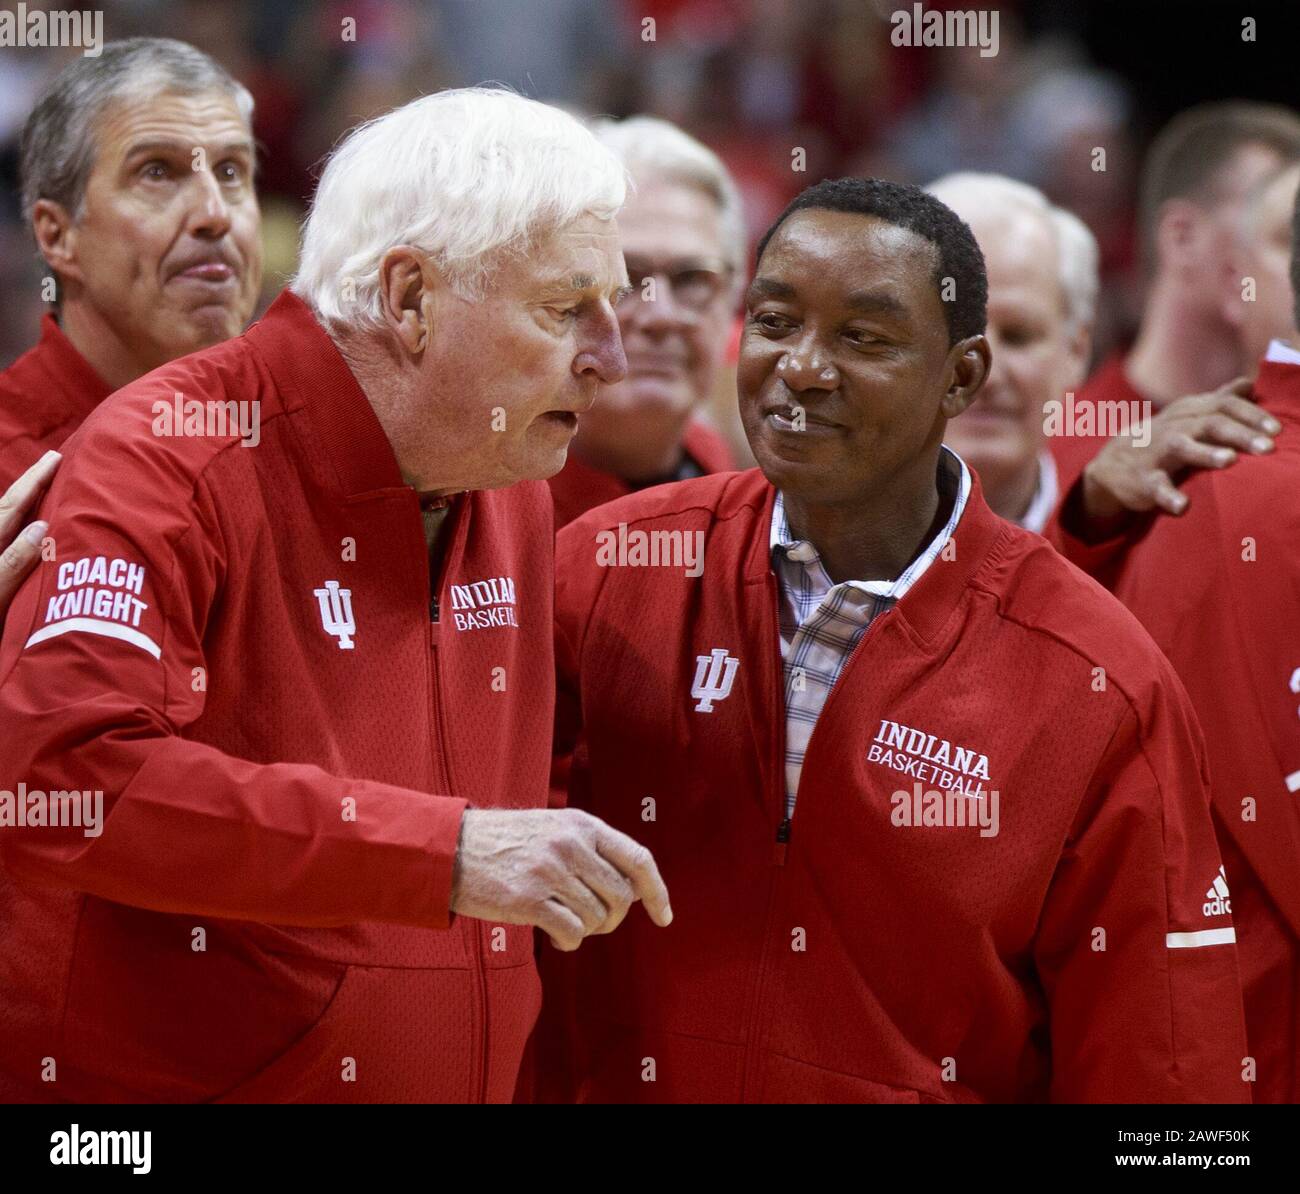 02082020 - Bloomington, Indiana, USA: Former Indiana University basketball player Isaiah Thomas, right, talks with his former coach, NCAA basketball coach Bob Knight, who took the Indiana Hoosiers to three NCAA national titles, returns to Assembly Hall, Saturday, February 8, 2020 in Bloomington, Indiana. Isaiah Thomas played on the 1980 and 1981 teams and then played in the NBA for the Detroit Pistons. (Photo by Jeremy Hogan/The Bloomingtonian) Stock Photo